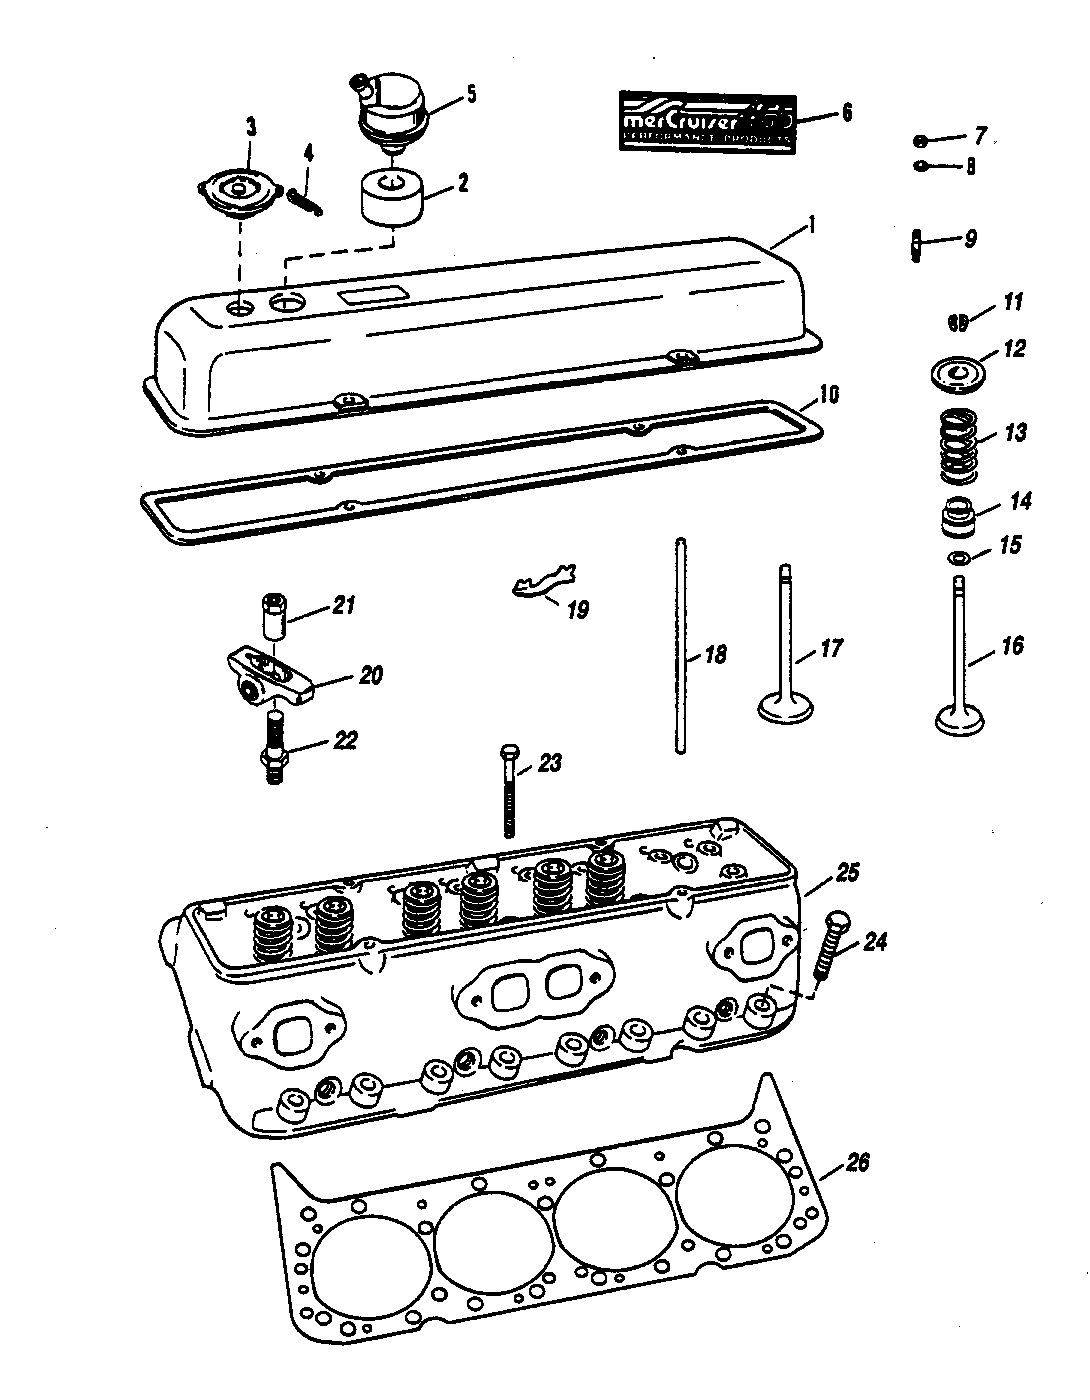 MERCRUISER 465 H.P. ENGINE CYLINDER HEAD AND ROCKER COVER